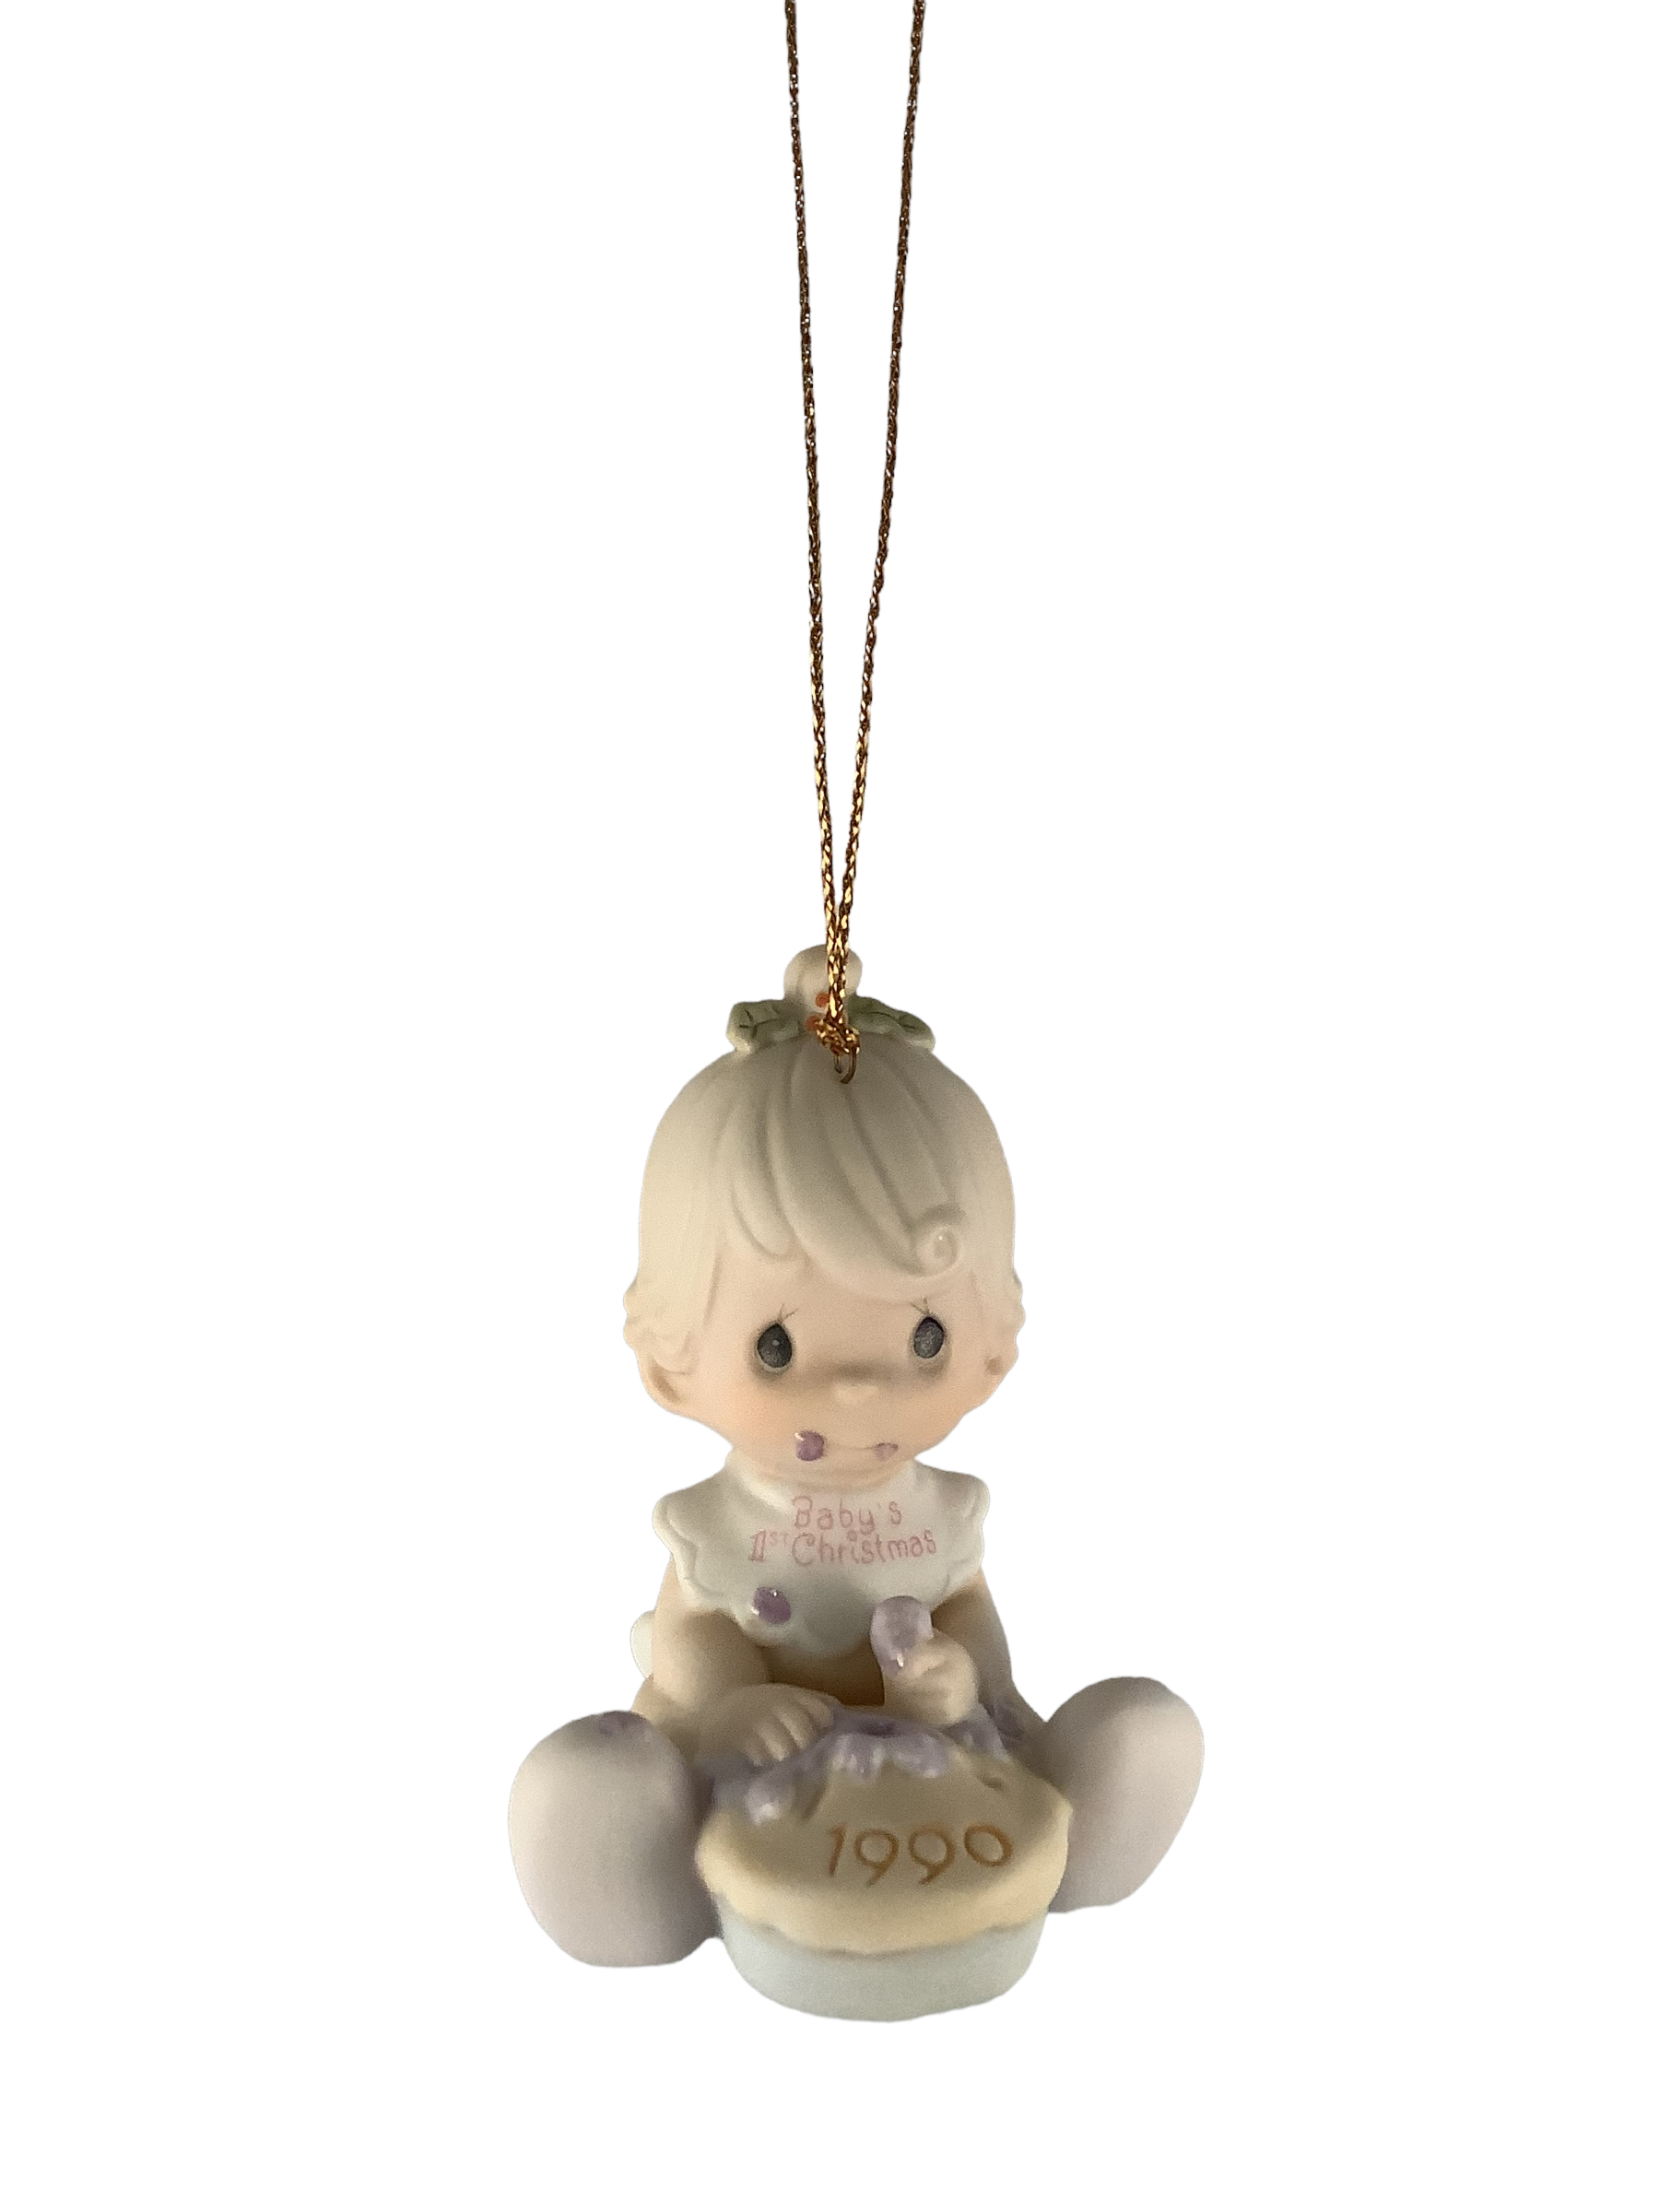 Baby's First Christmas 1990 (Girl) - Precious Moments Ornament